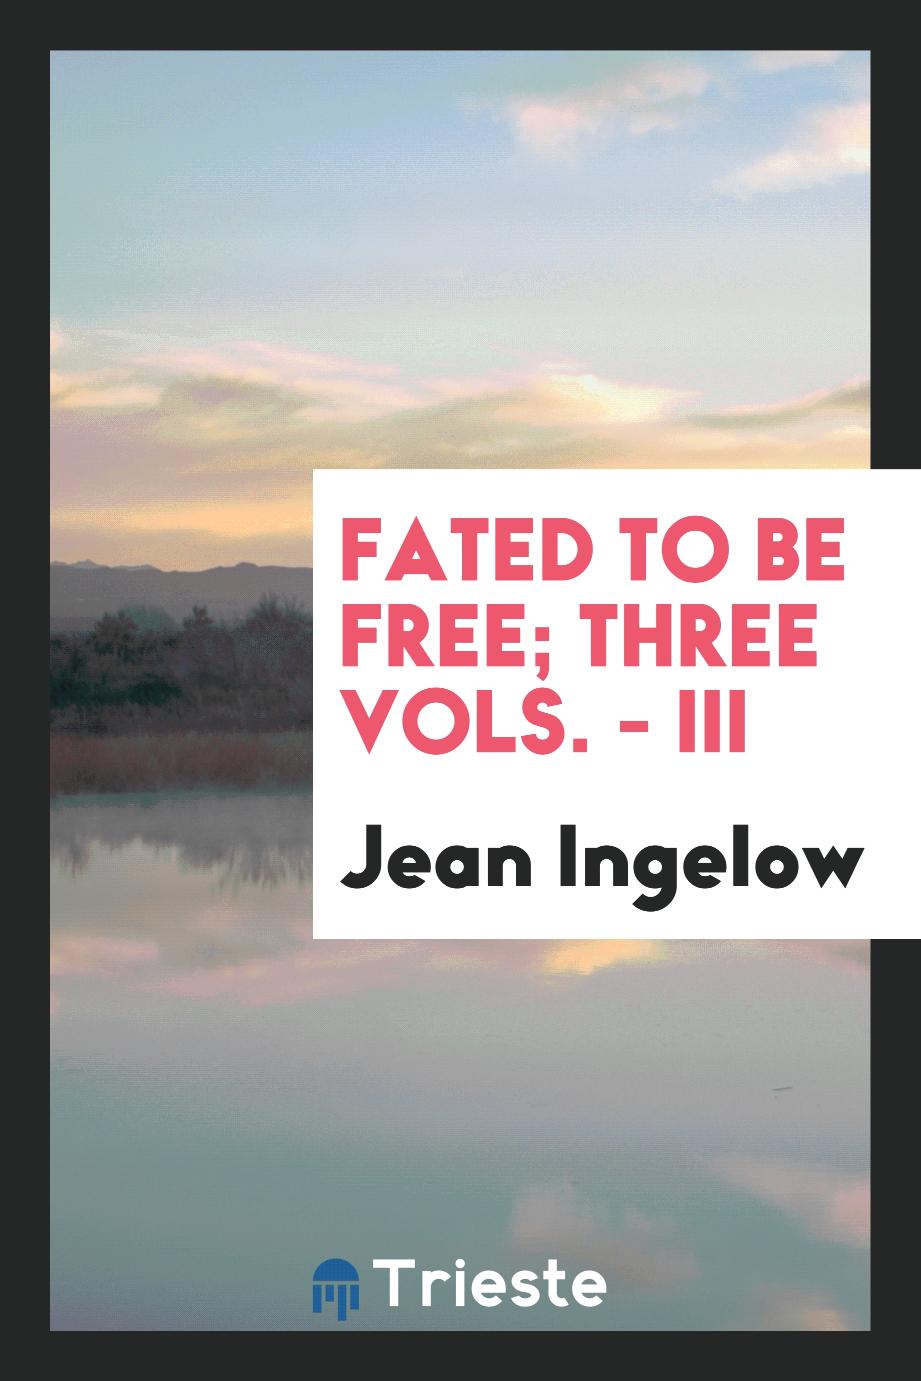 Fated to be free; three vols. - III